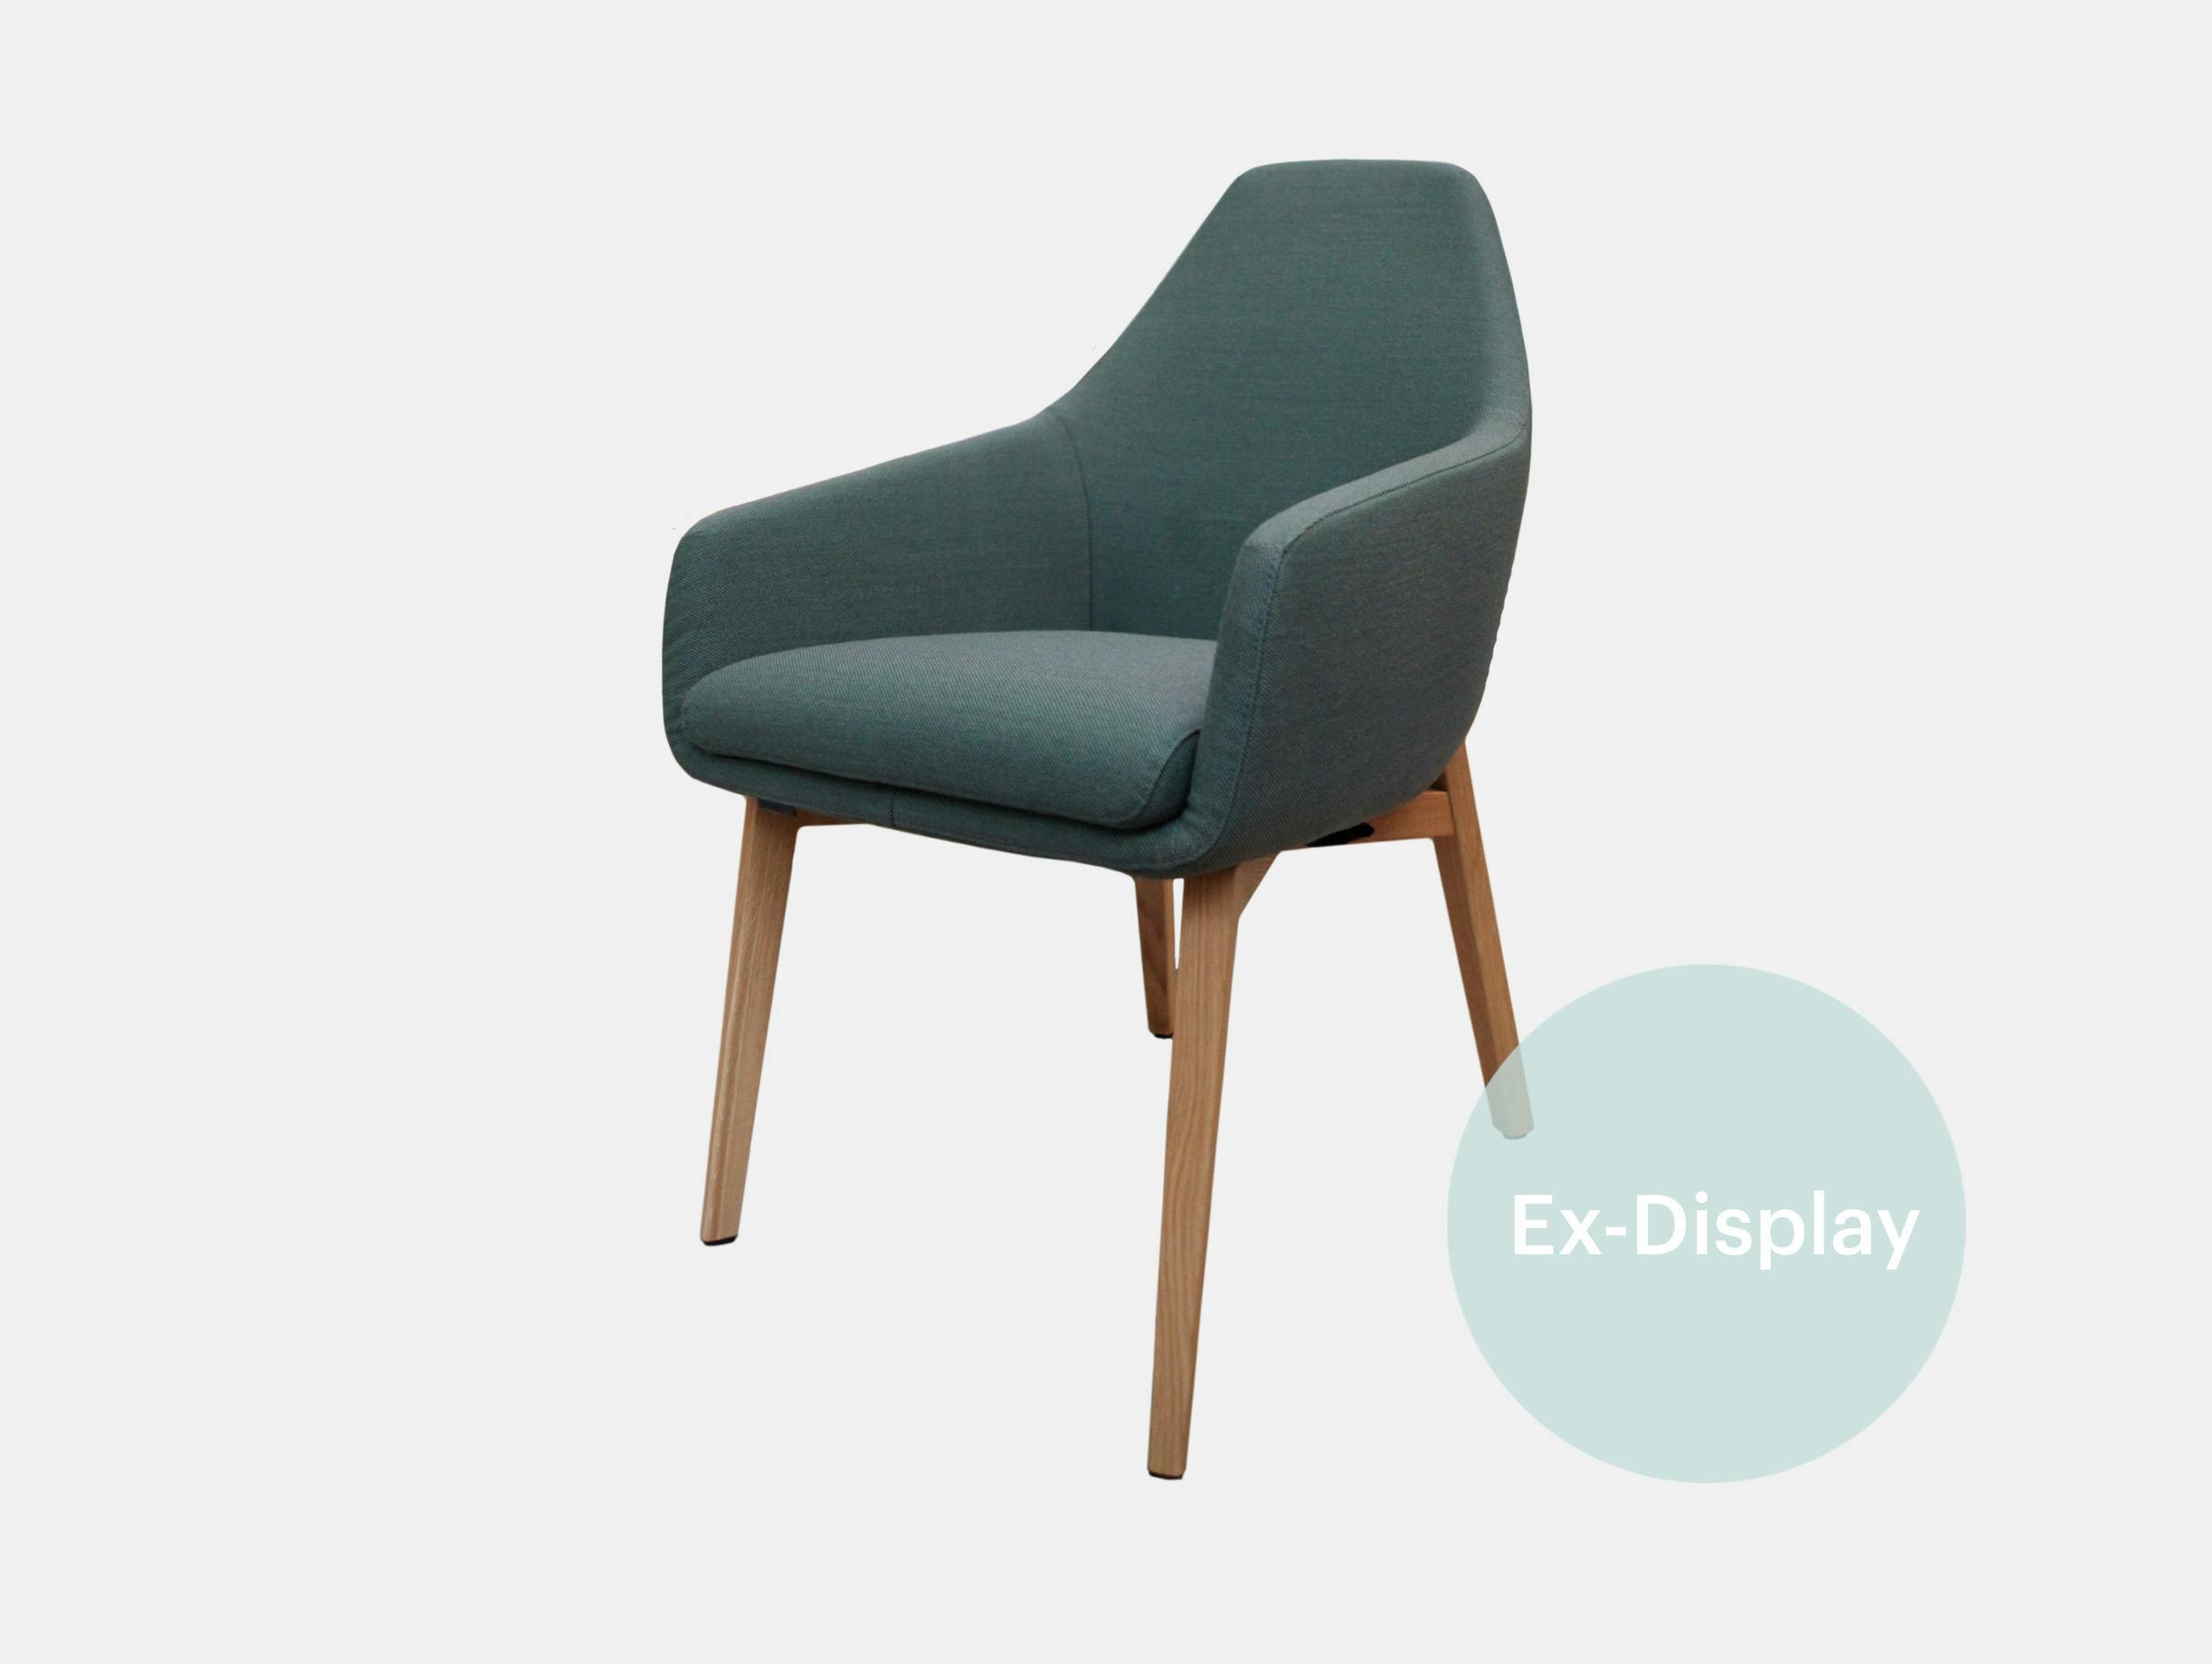 Xdp montis geert koster vico chair1